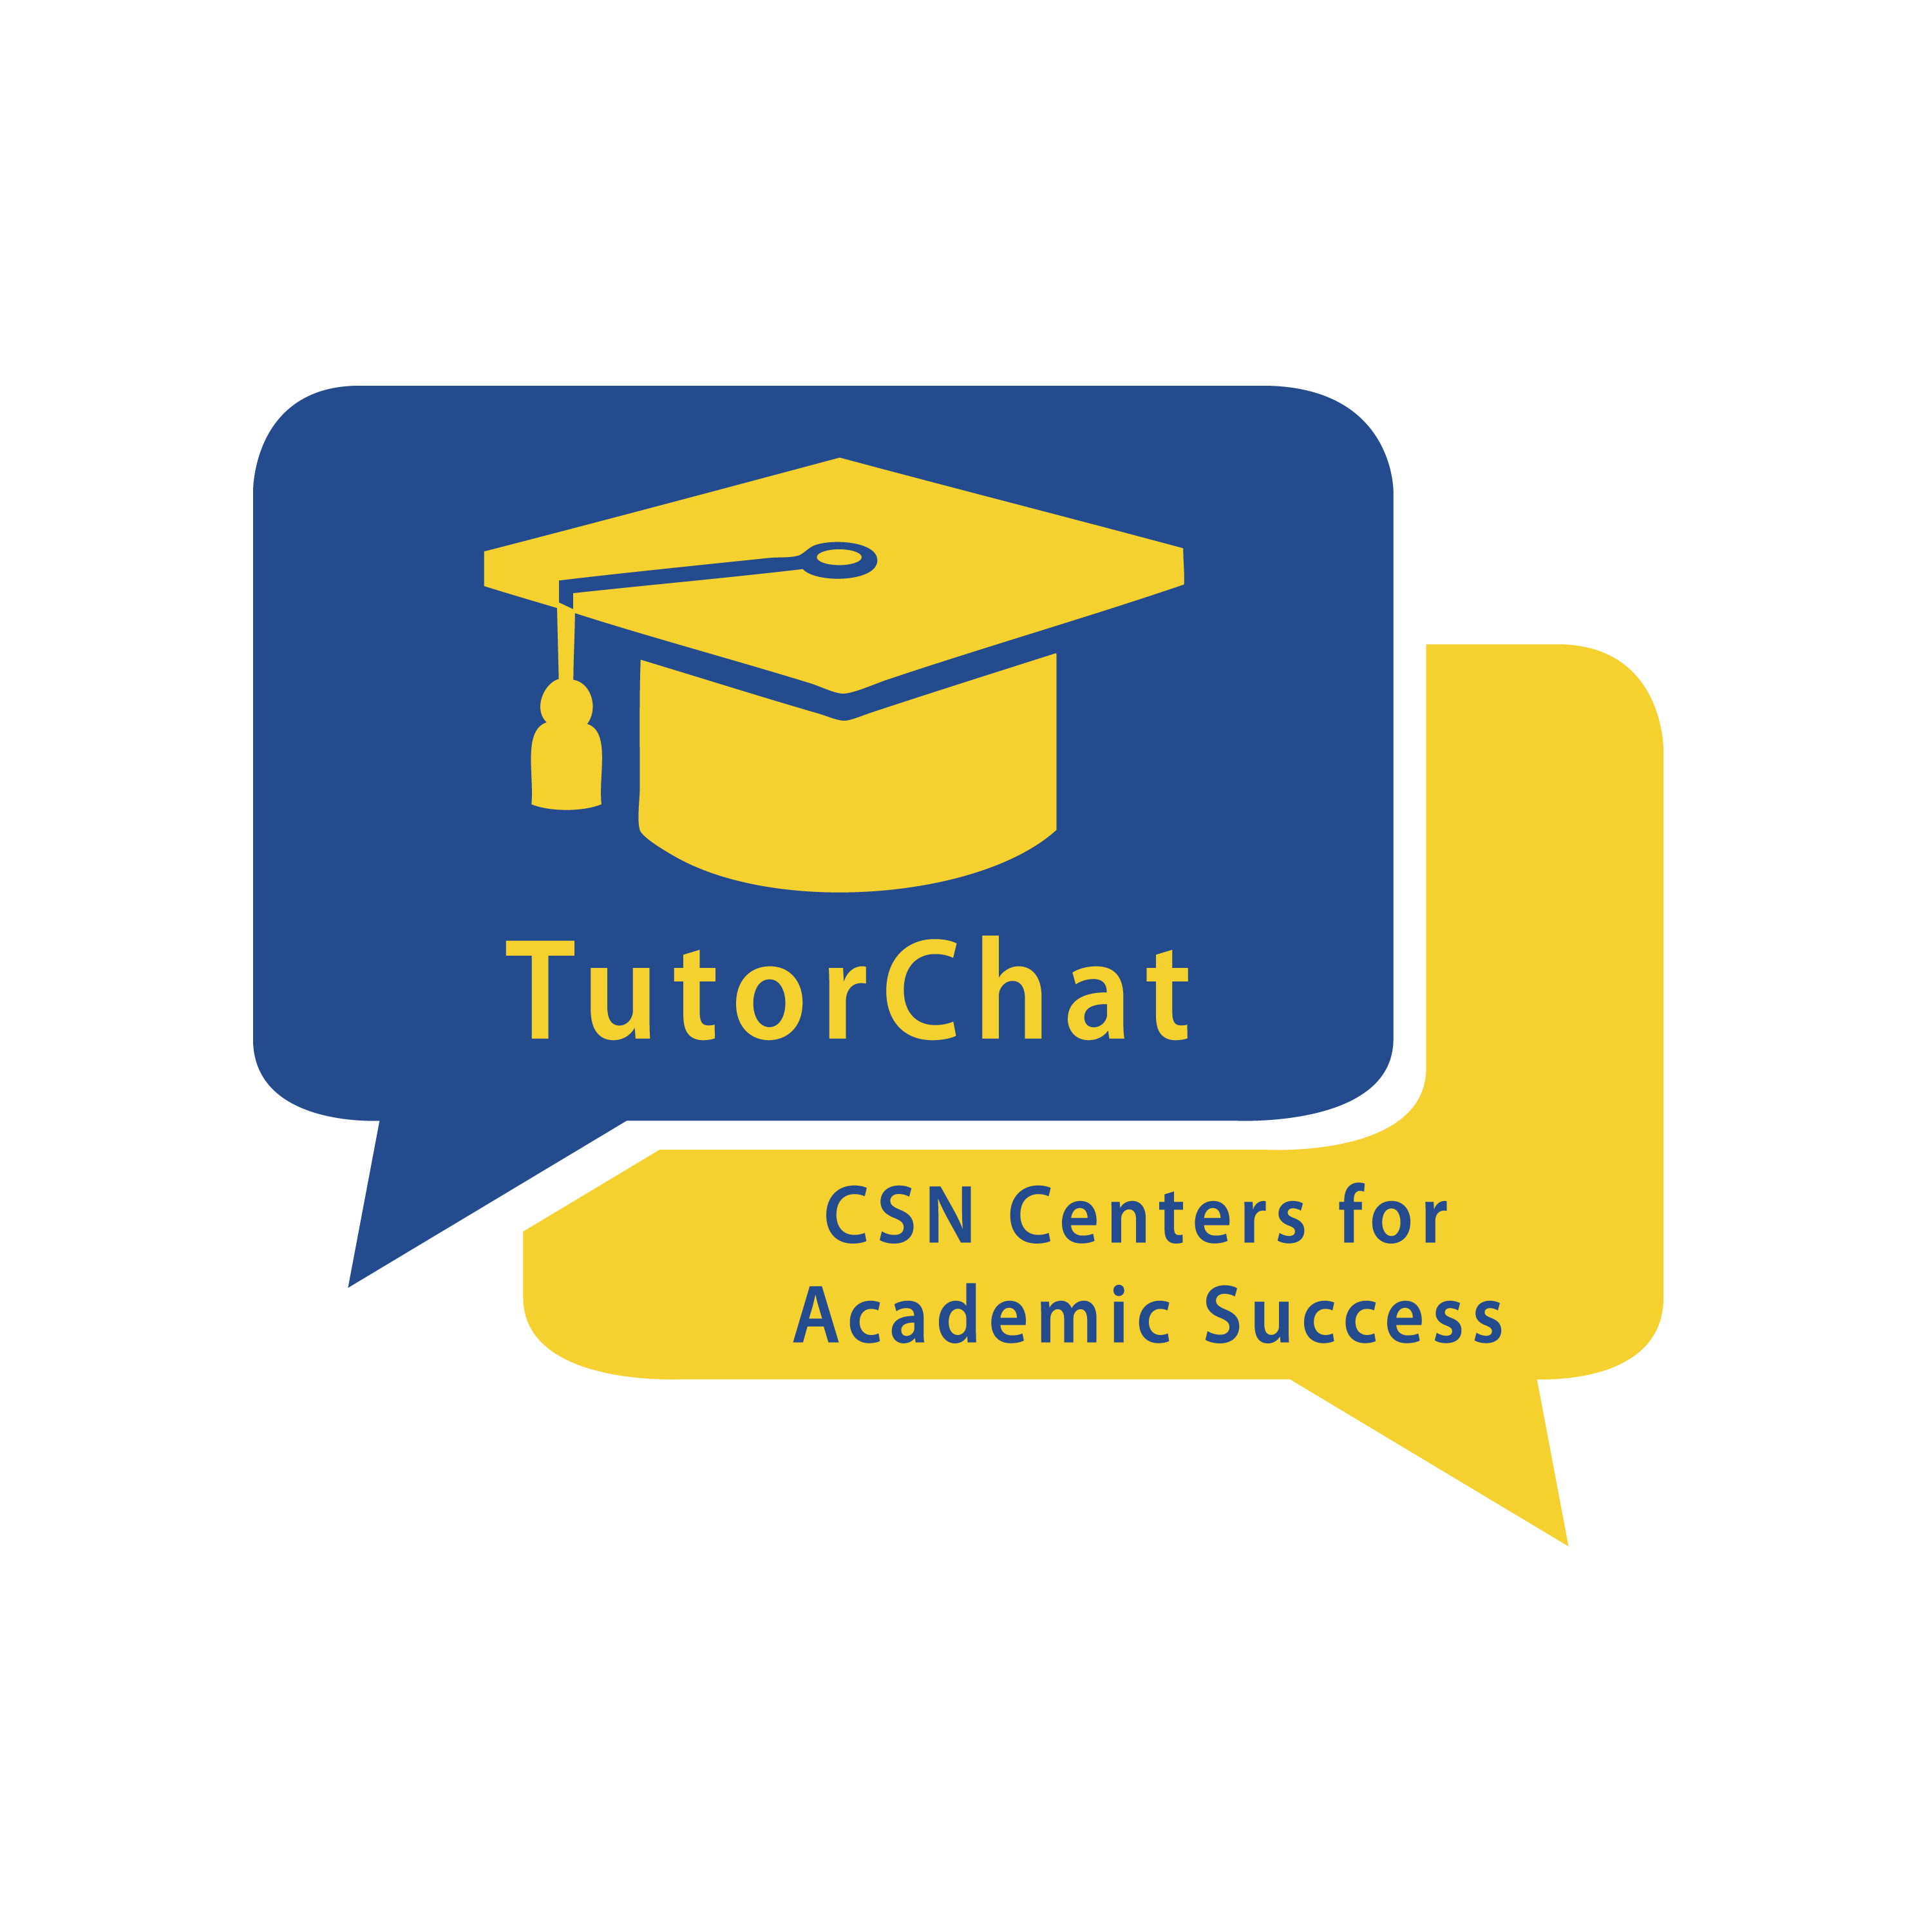 TutorChat2 image and link